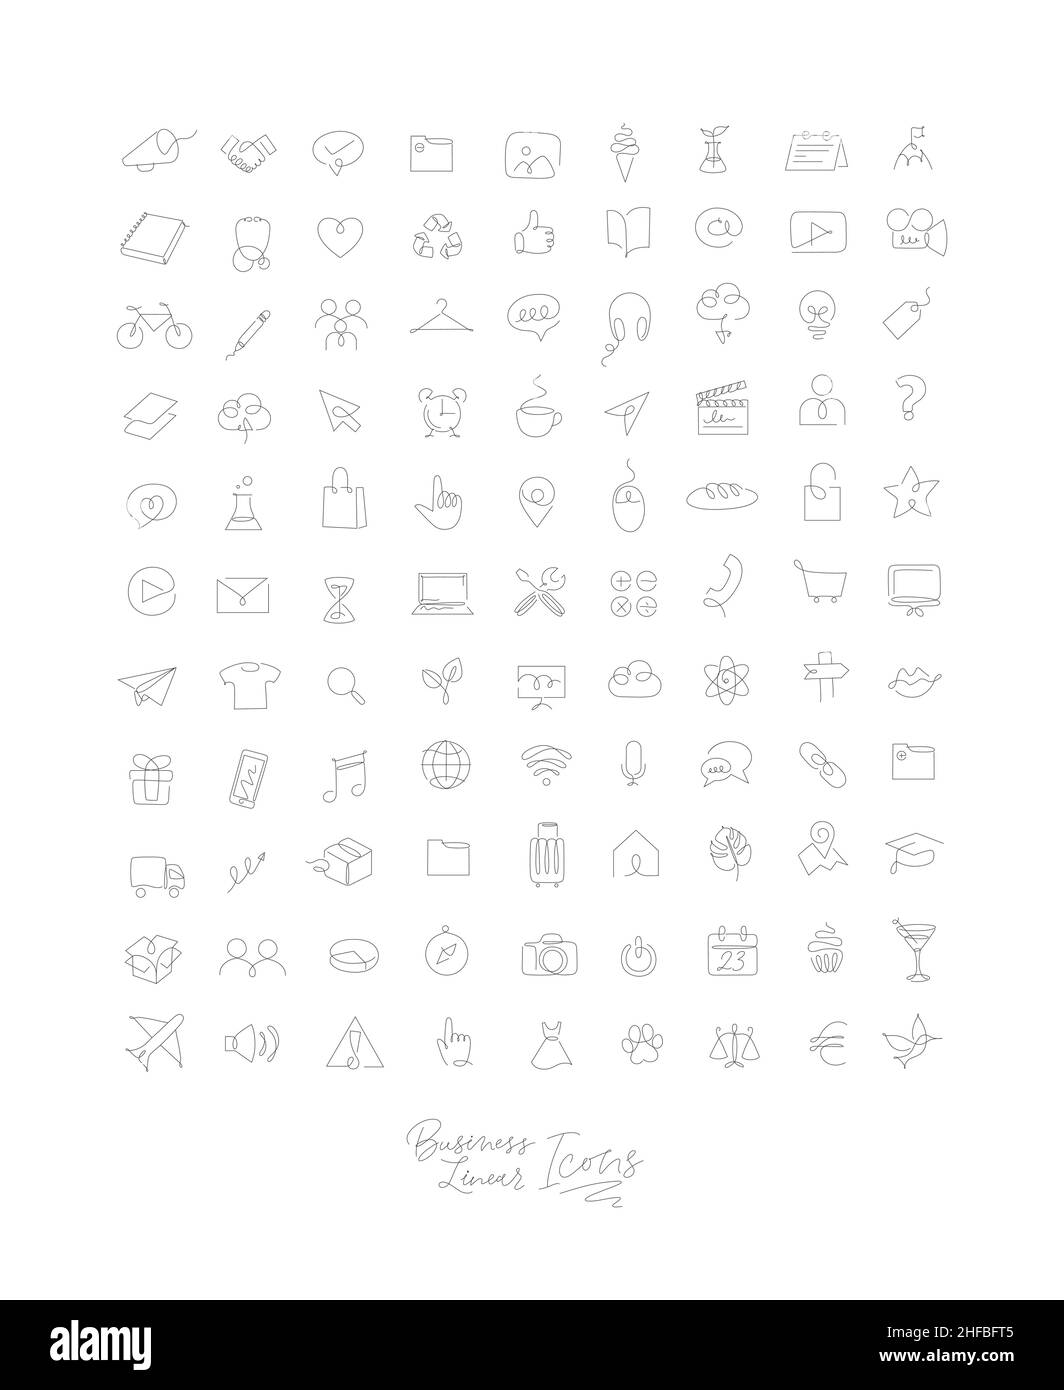 Minimalist linear icons for business drawing on white background. Stock Vector